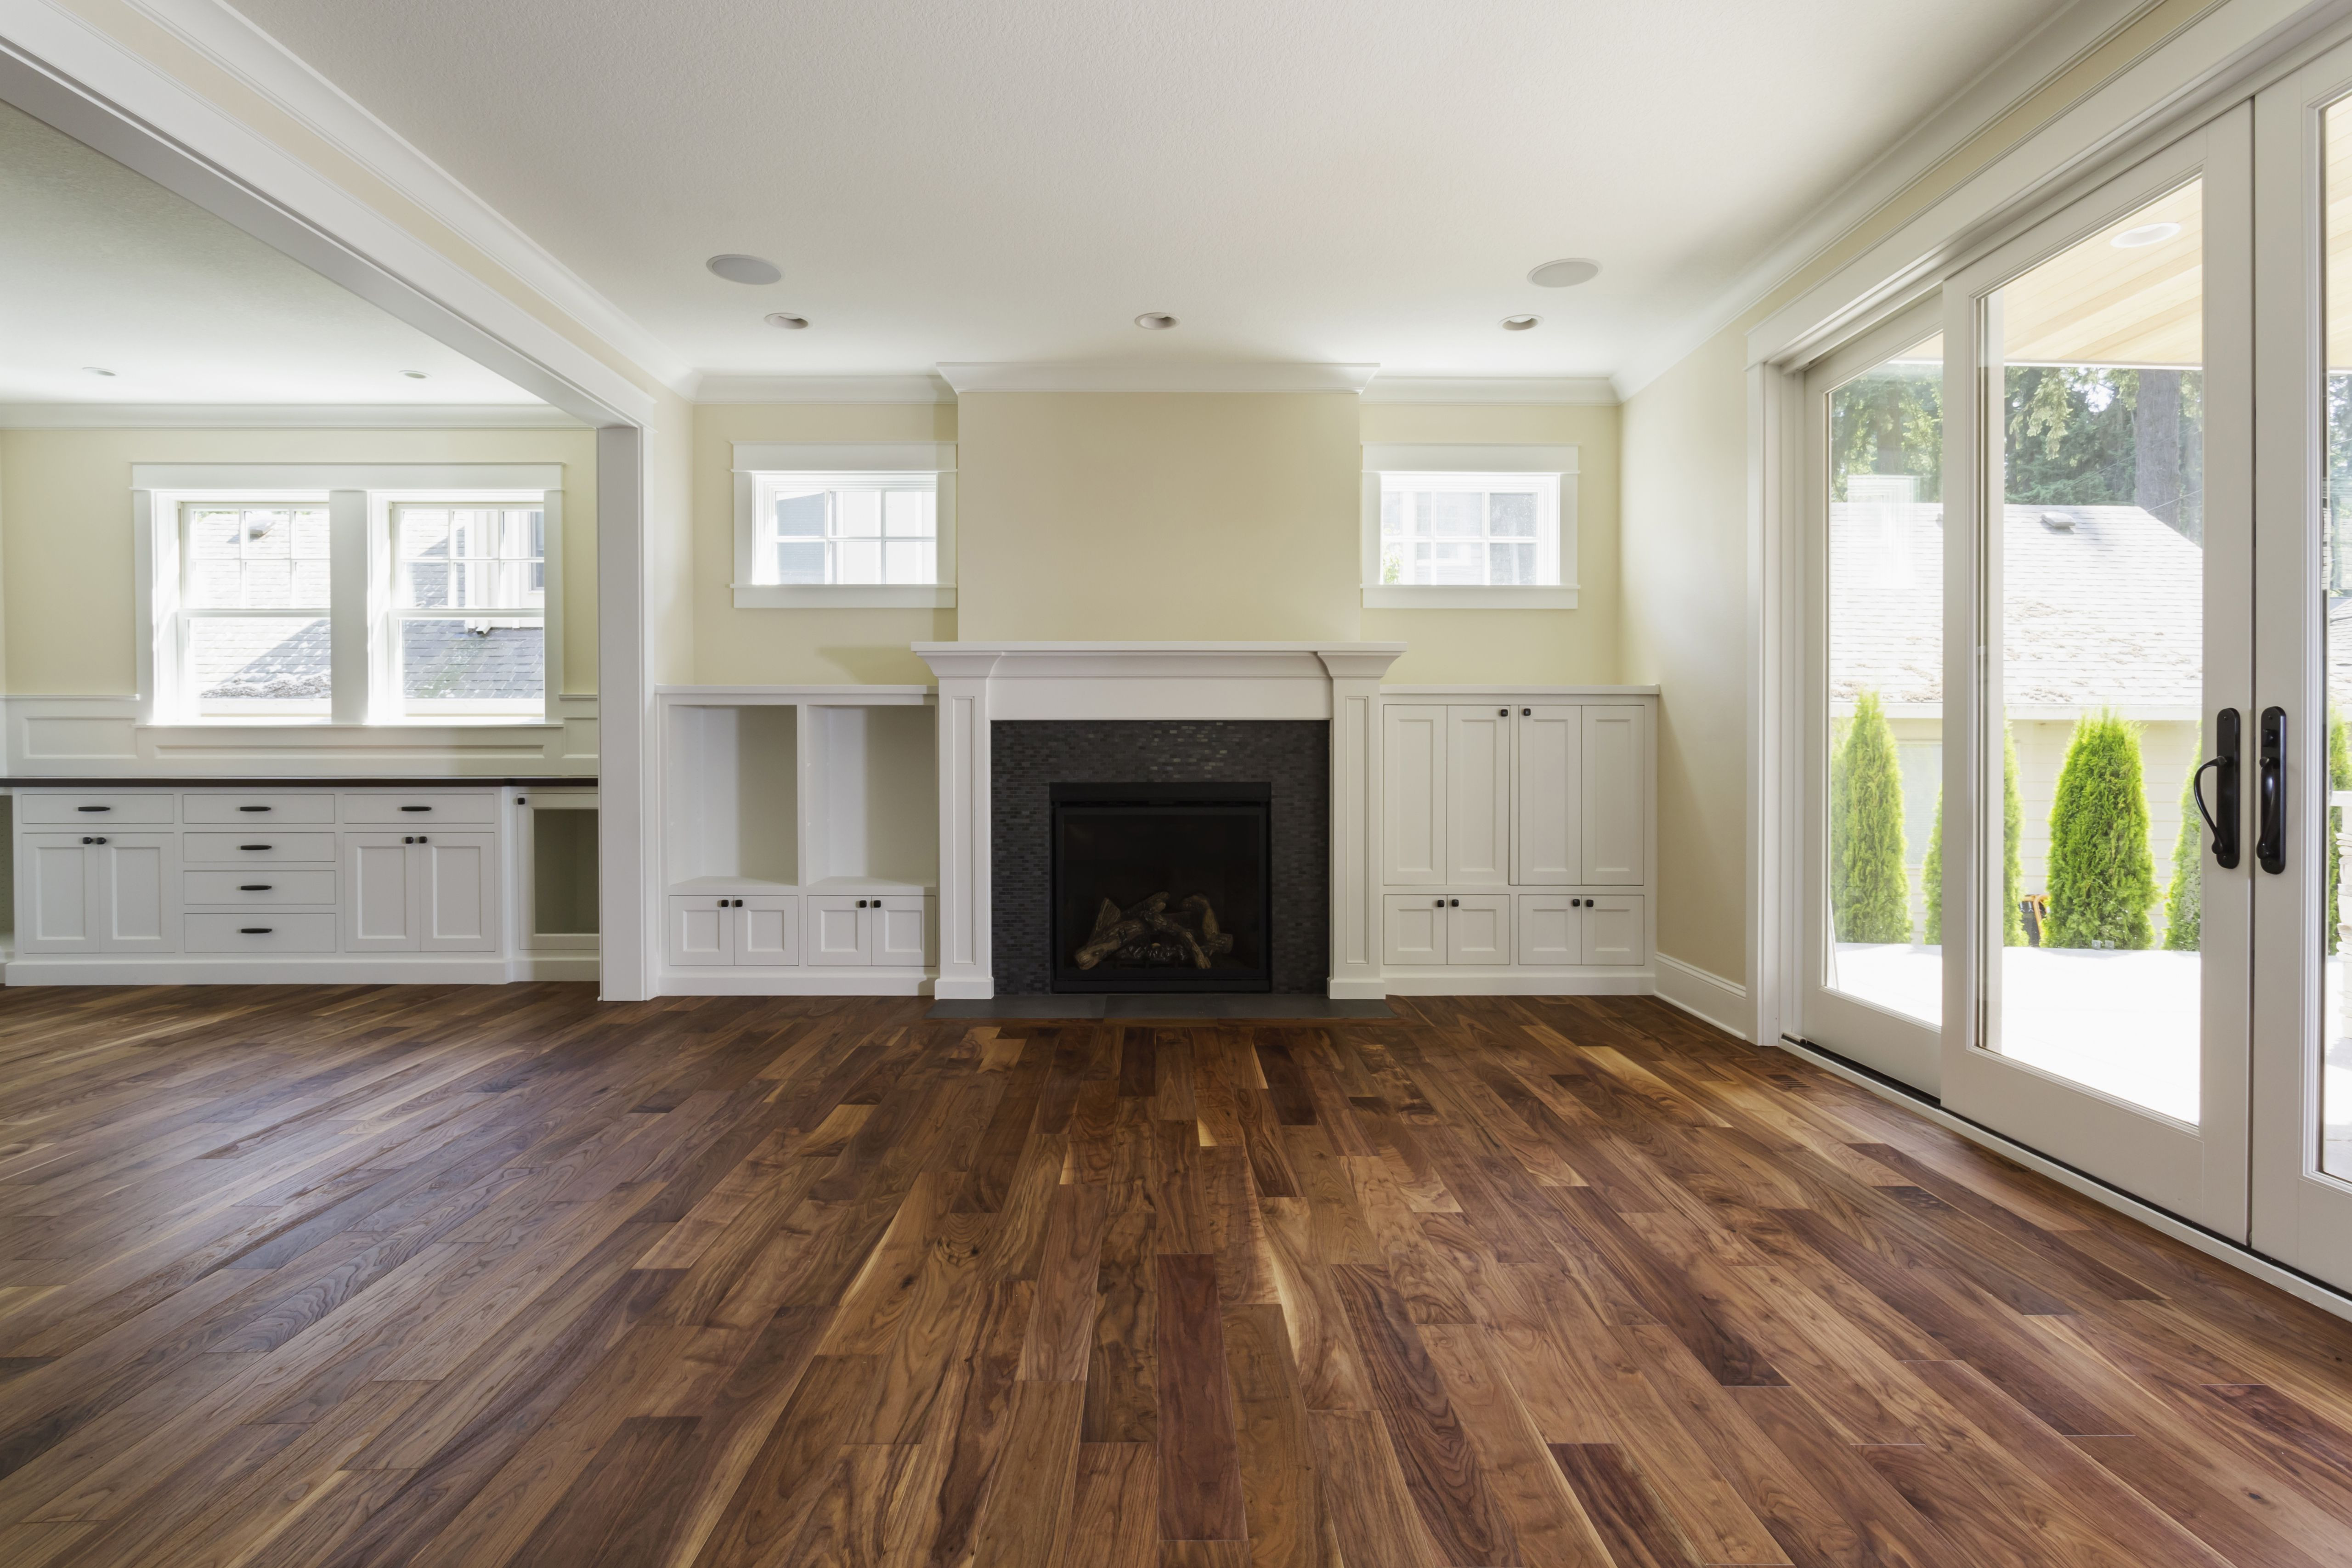 install hardwood floor around stairs of the pros and cons of prefinished hardwood flooring in fireplace and built in shelves in living room 482143011 57bef8e33df78cc16e035397